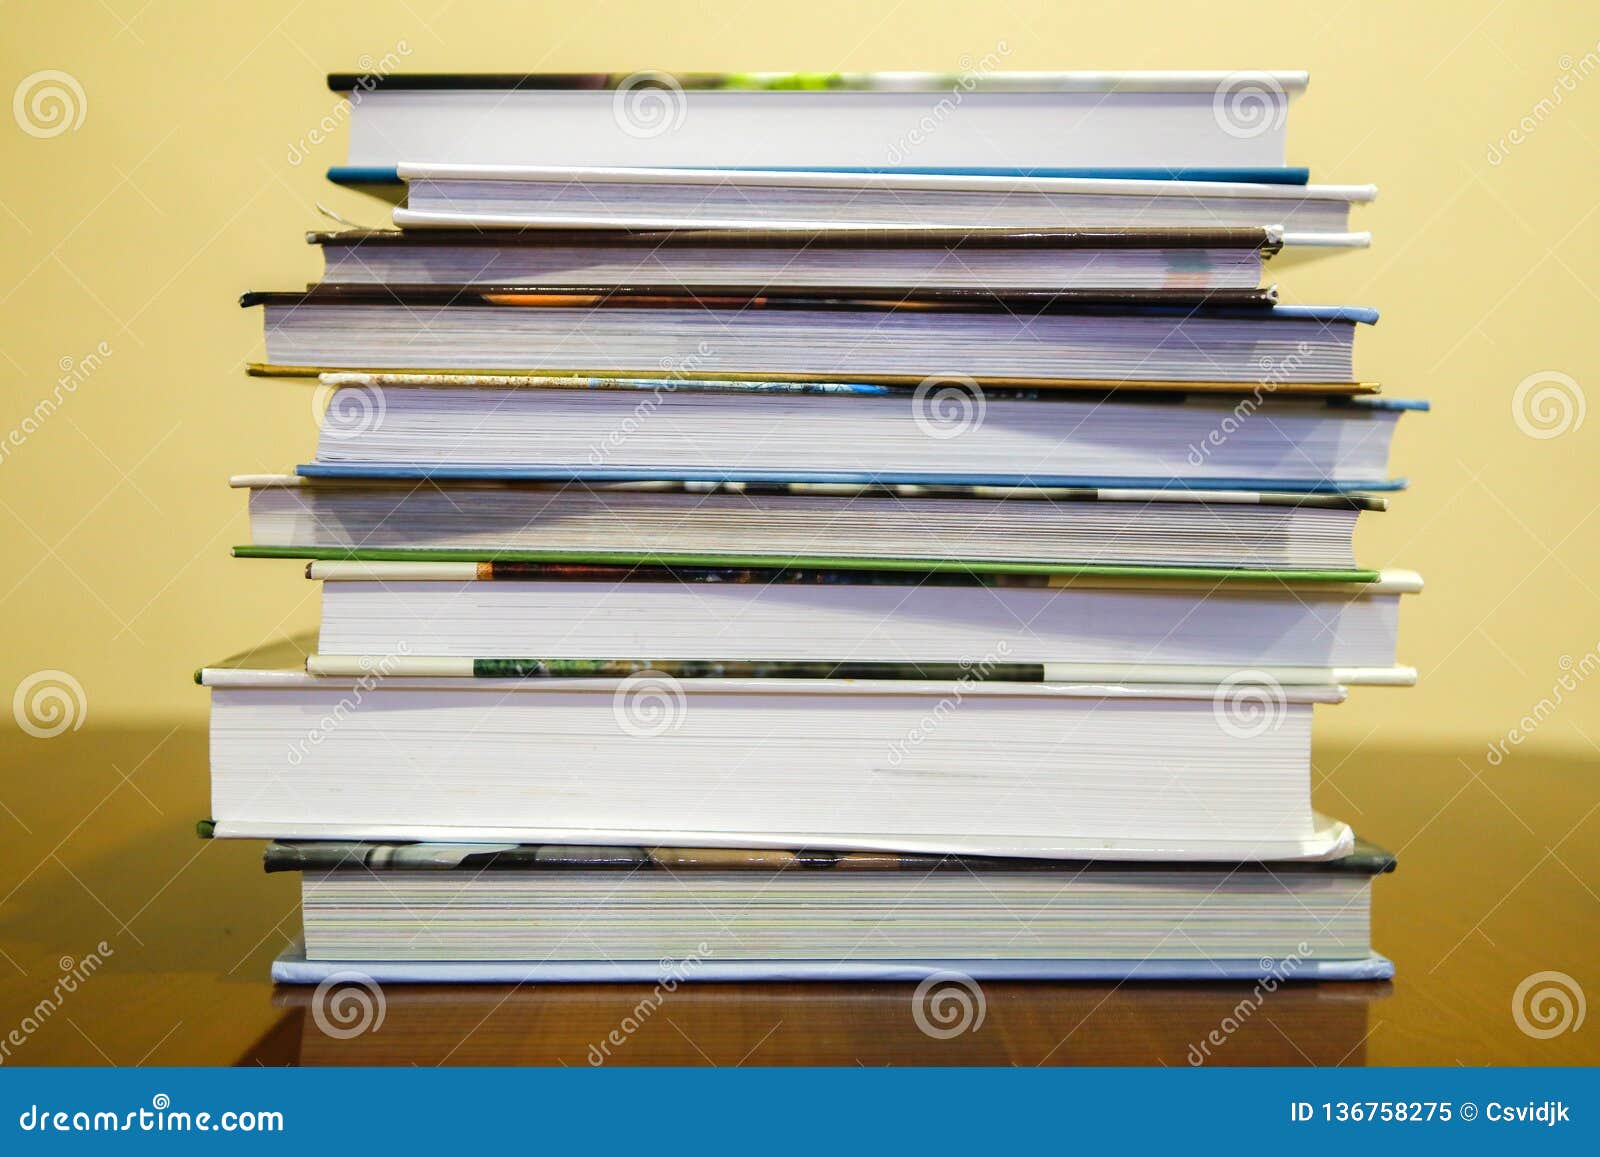 Books Lie on the Table on Top of Each Other + Transparent Background Png  Stock Image - Image of pages, frame: 136758275